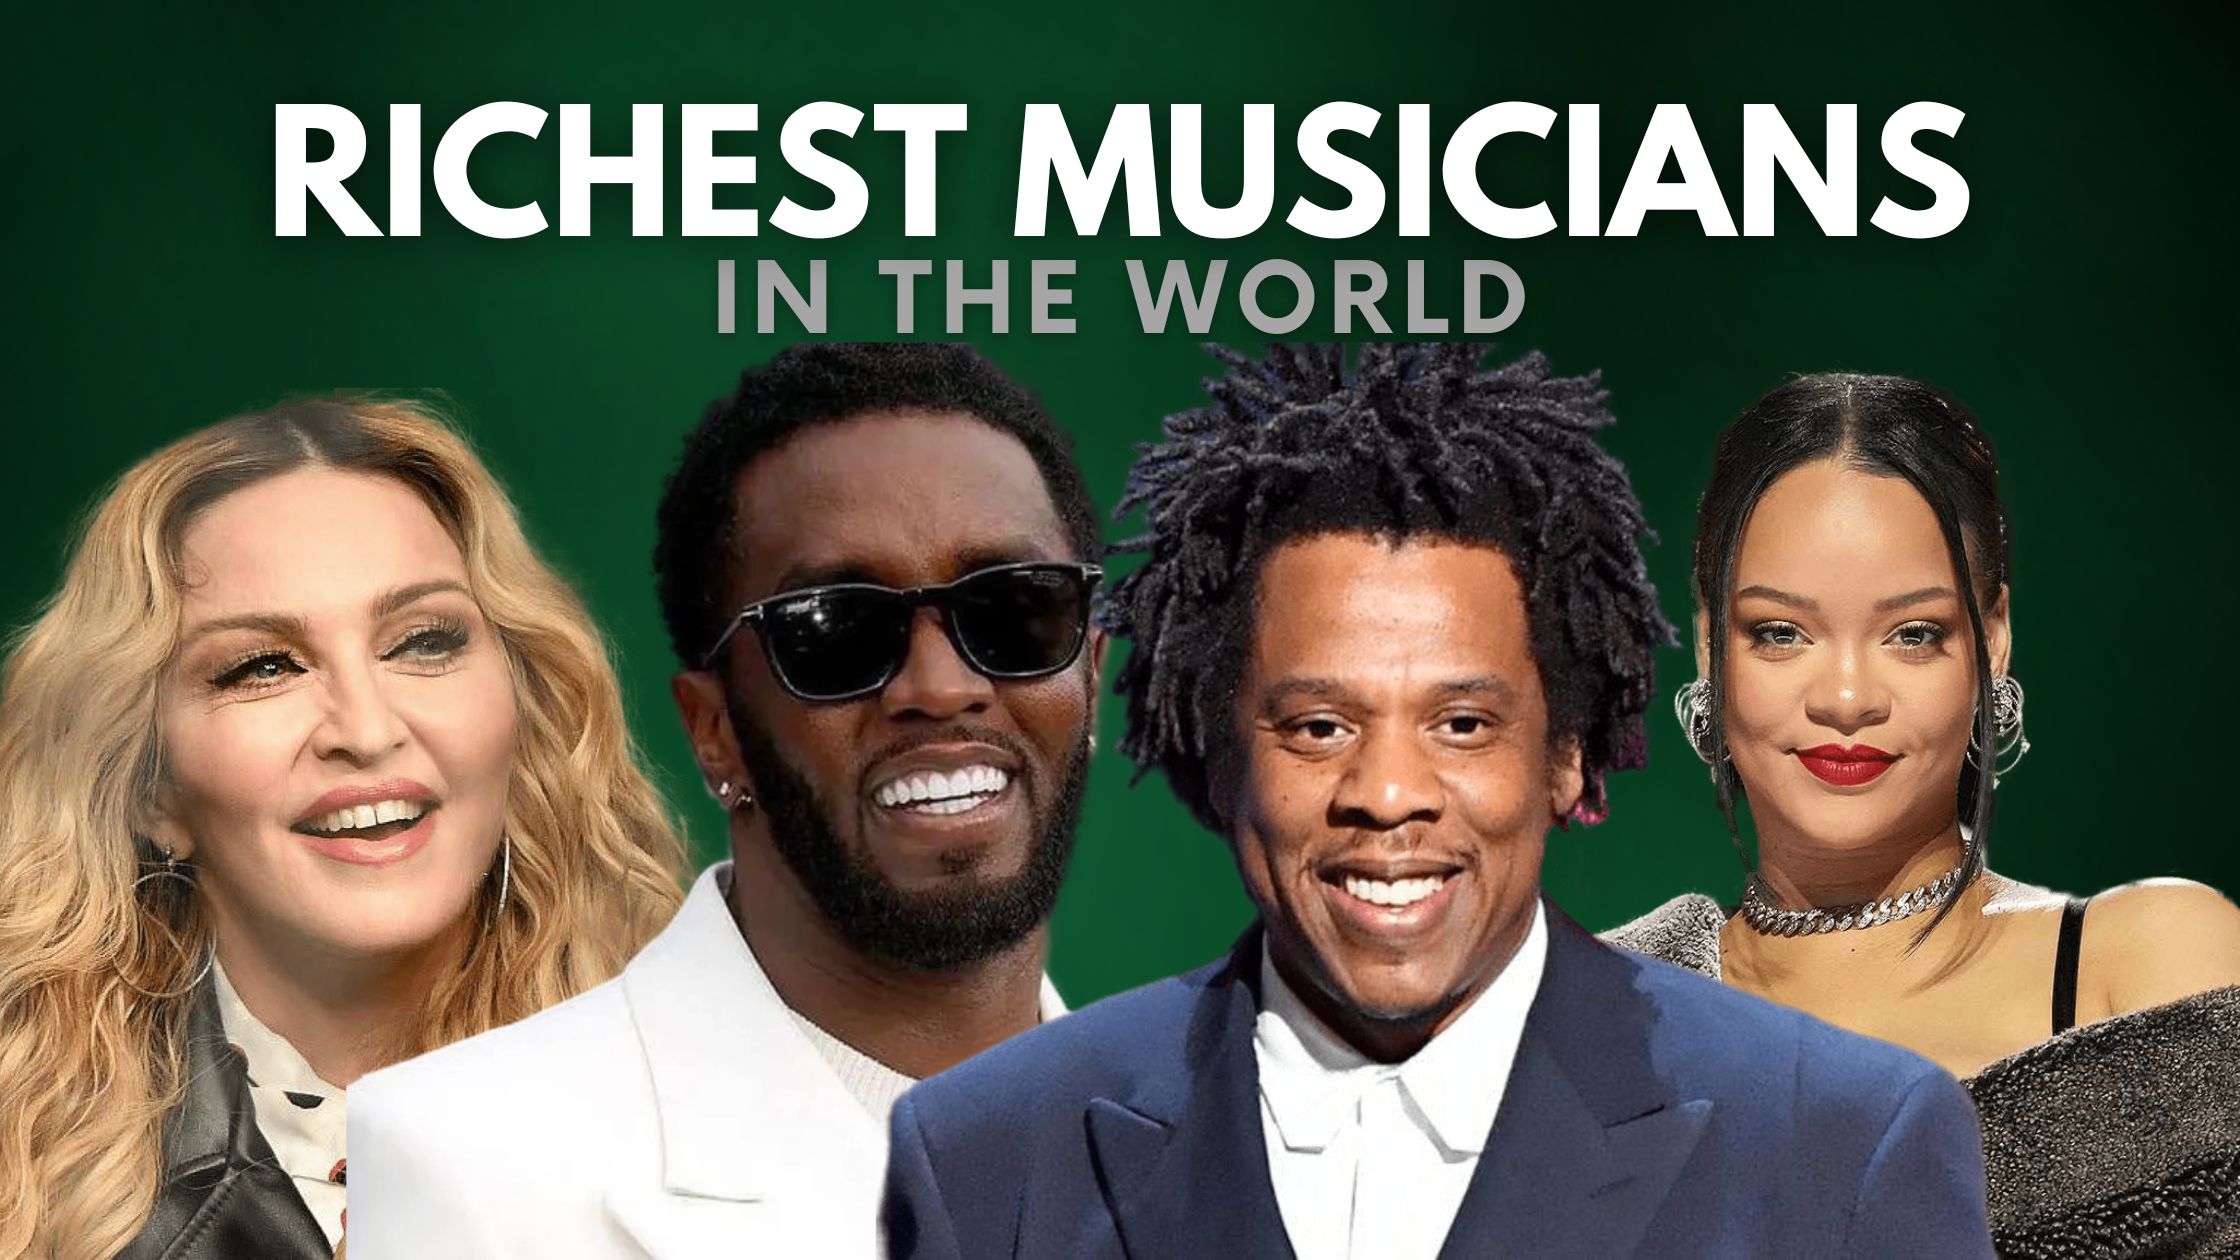 L-R: Madonna, P-Diddy, Jay-Z, and Rihanna || The Richest Musicians in the World